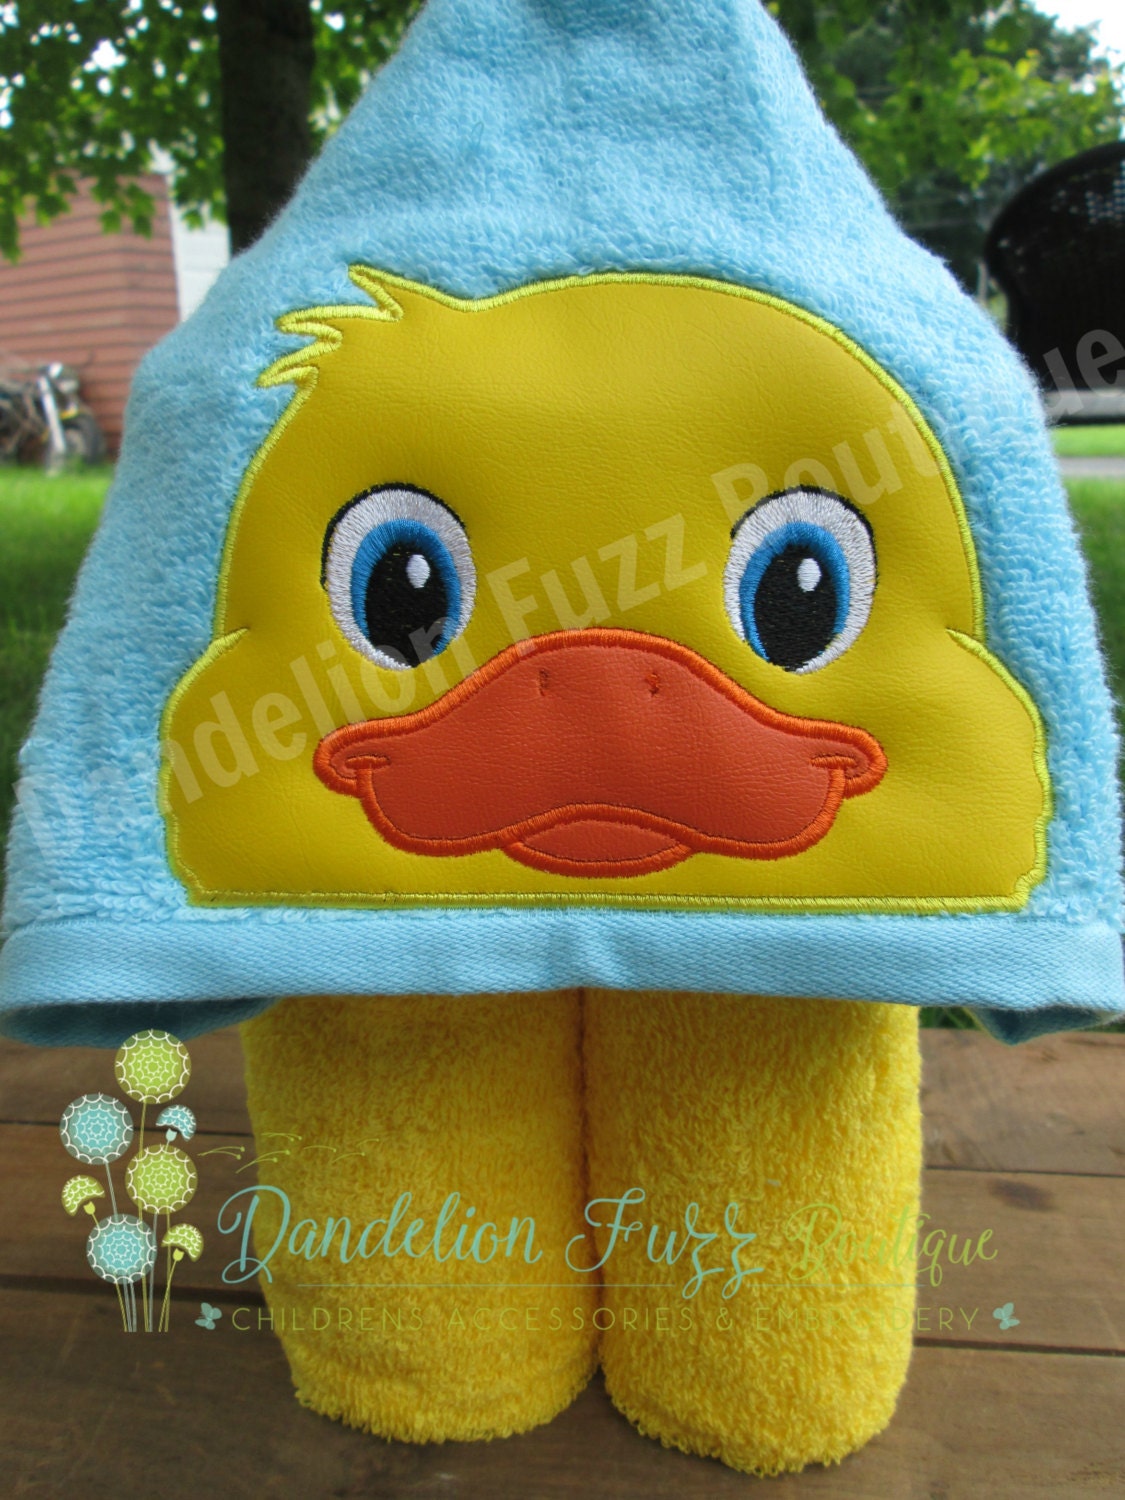 Duck Hooded Towel, Beach Towel, Pool Towel, Duck Baby Towel, Party Favors, Birthday Party Favor, Baby Shower Gift